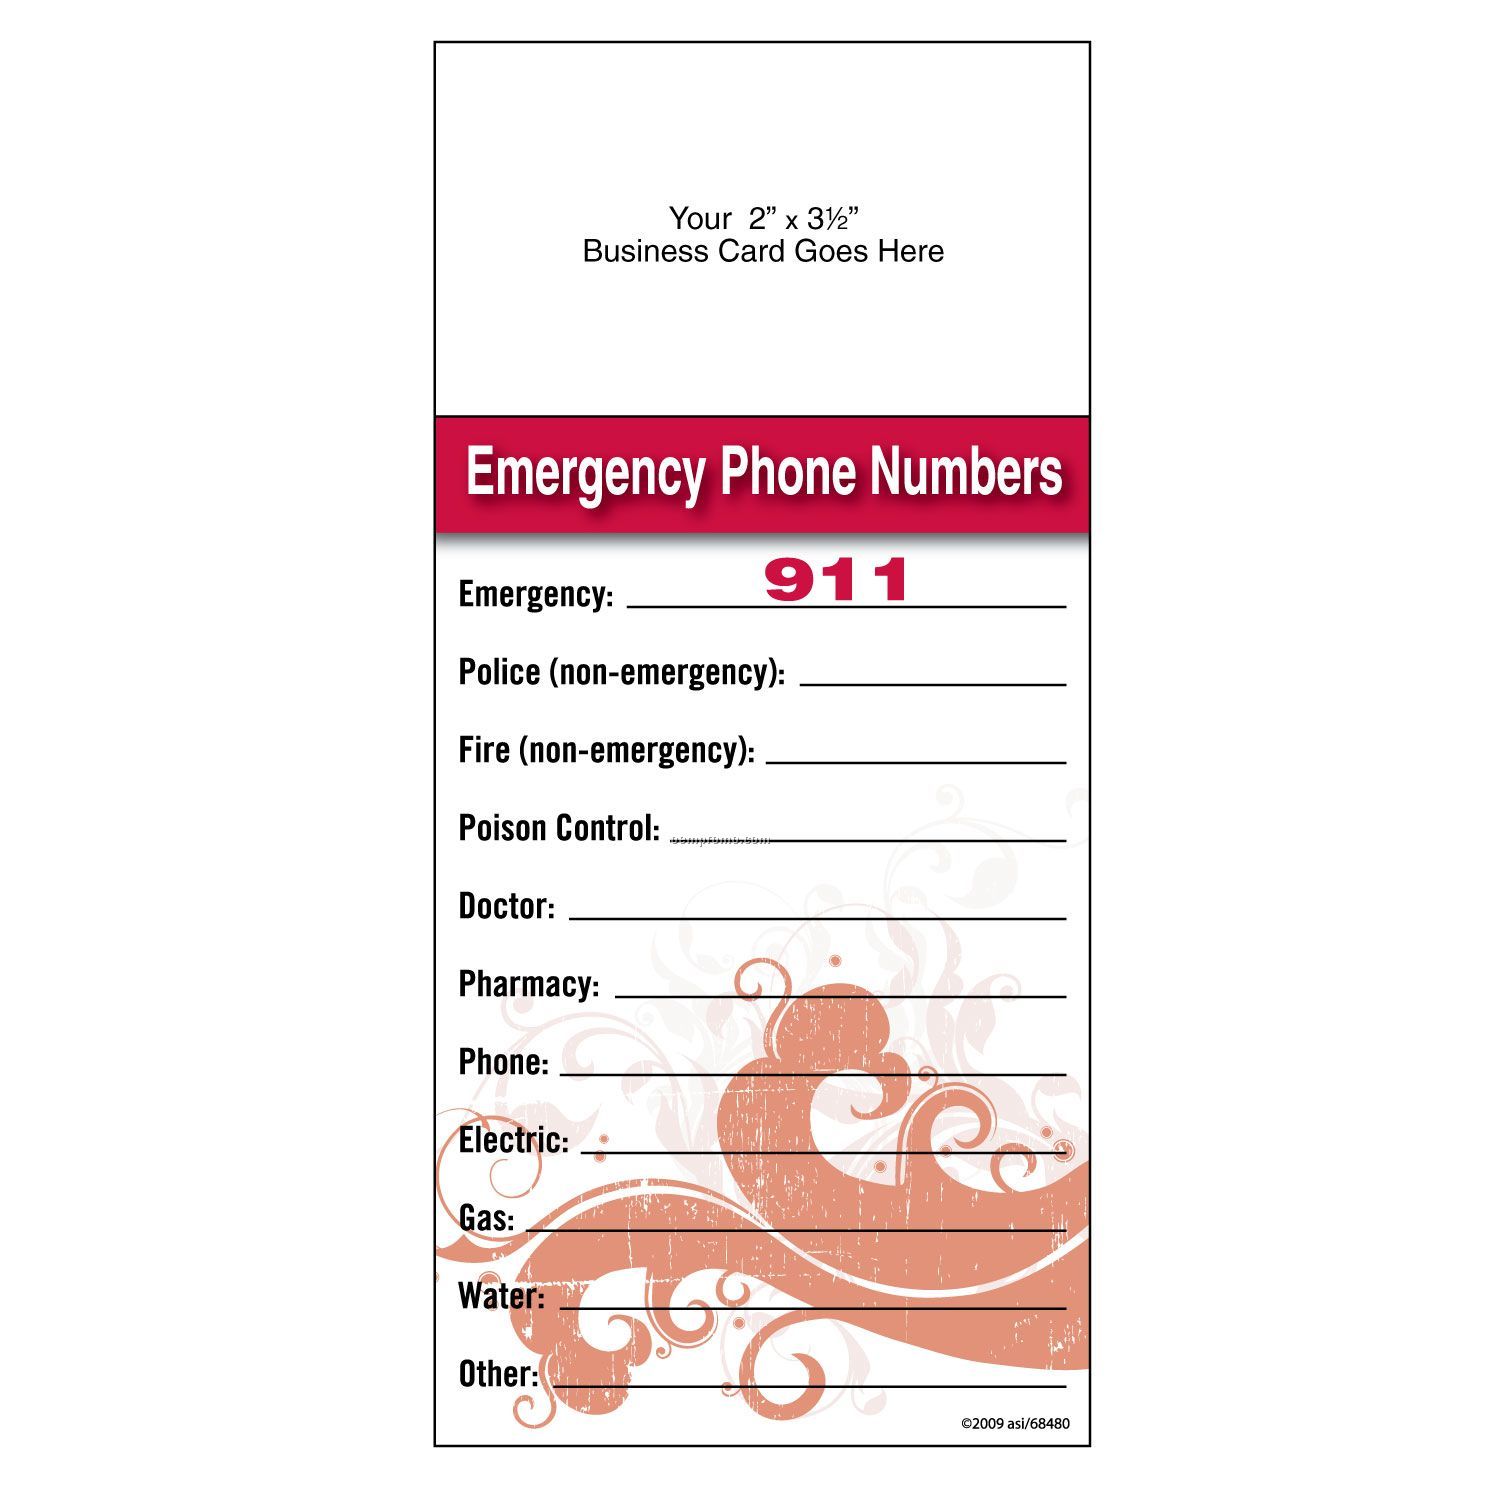 Self-adhesive Add-on Magnet + Info Card "Emergency Phone Numbers"